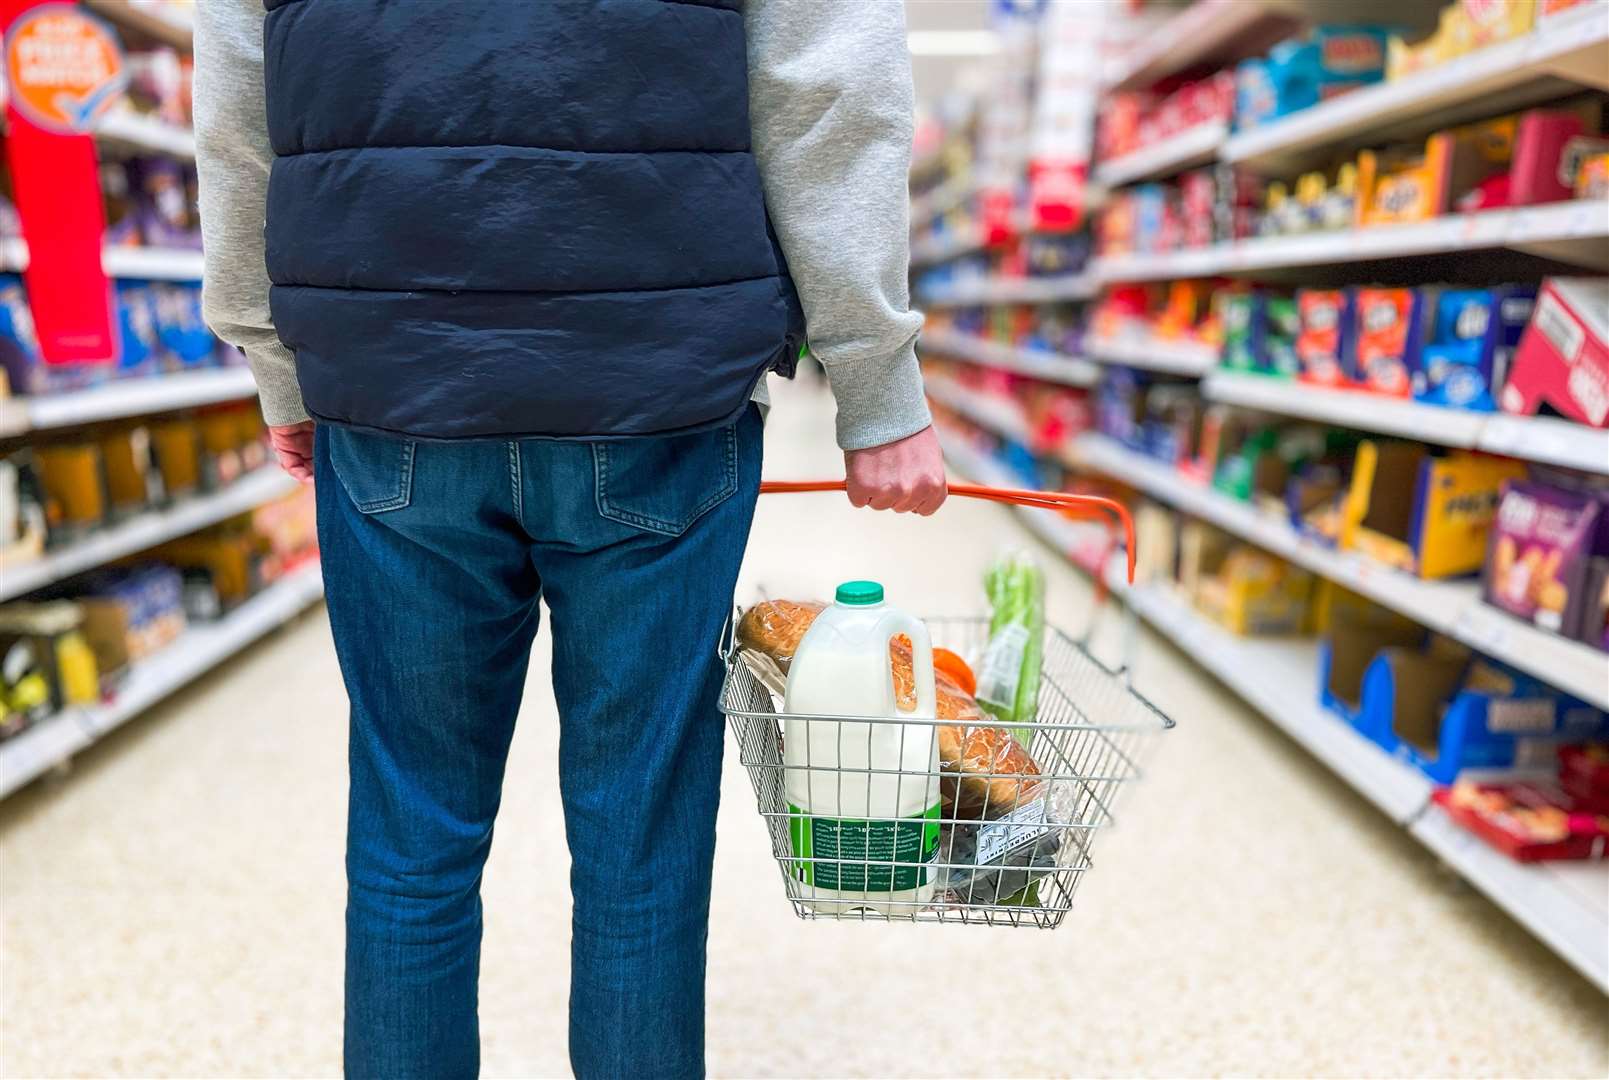 Shoppers are being asked to take affected packets back. Image: iStock photo.